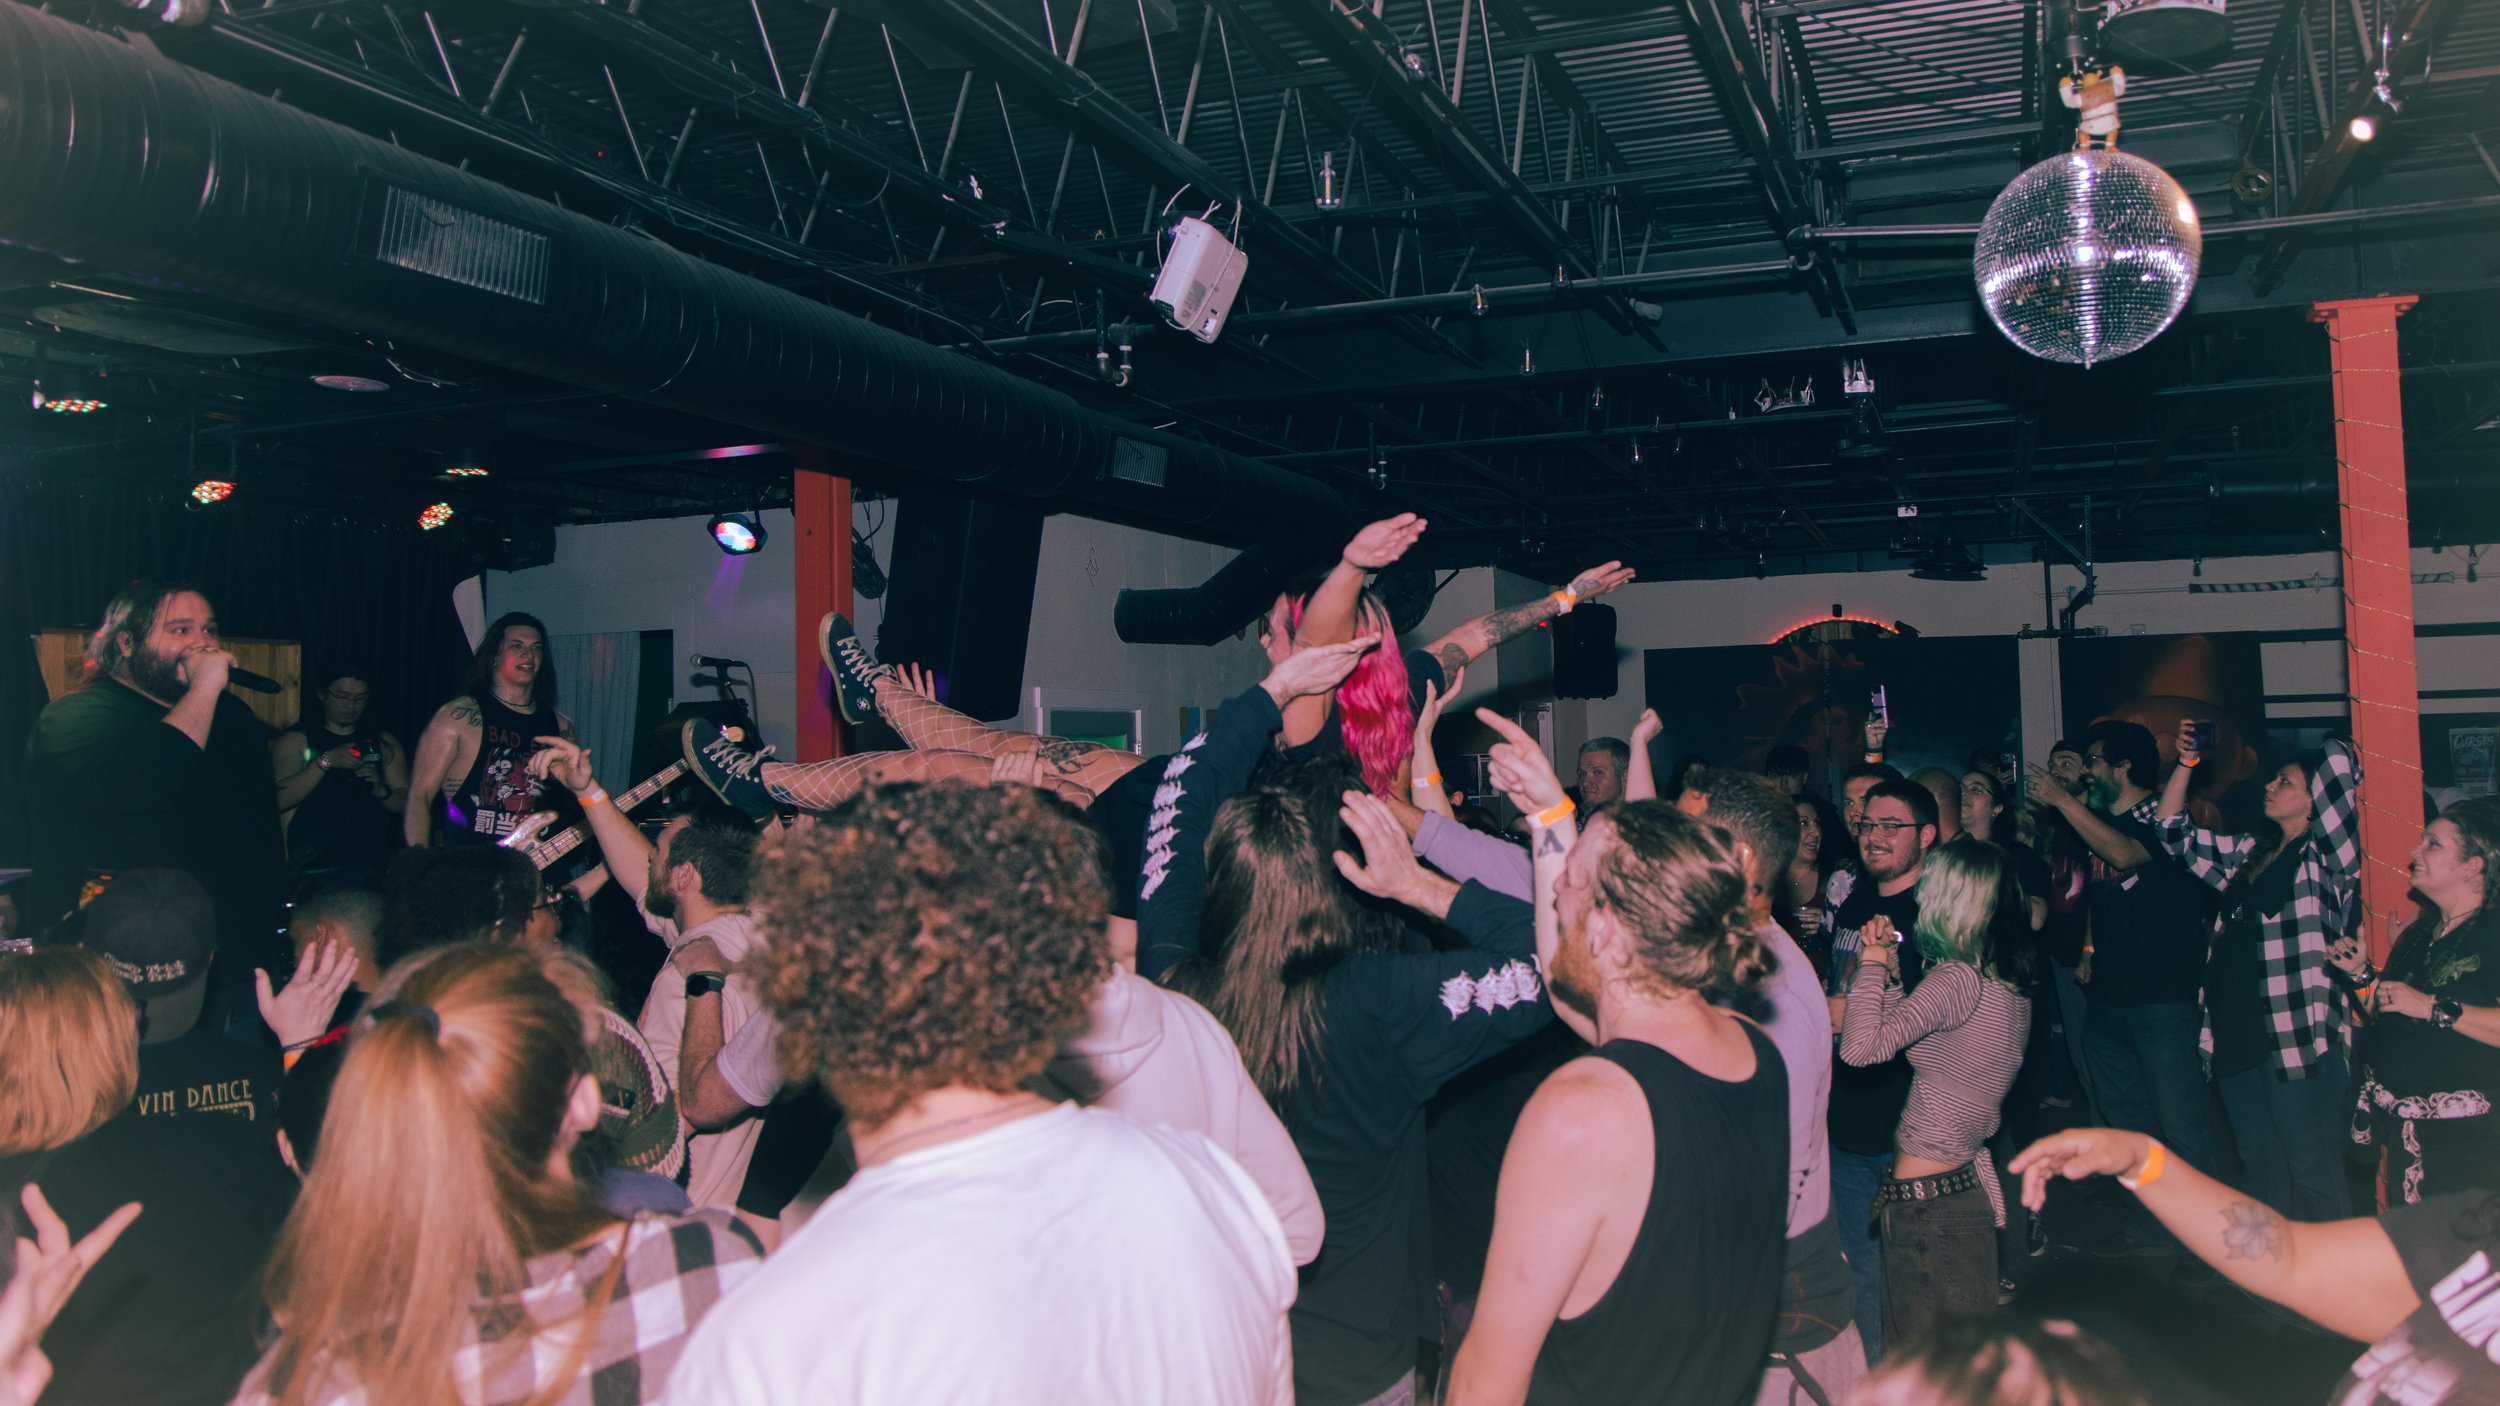 crowd_surfing_singalong_live_music_archers_nerv_152_packed_show_venue_oscura_bradenton_tampa_metalcore.jpg